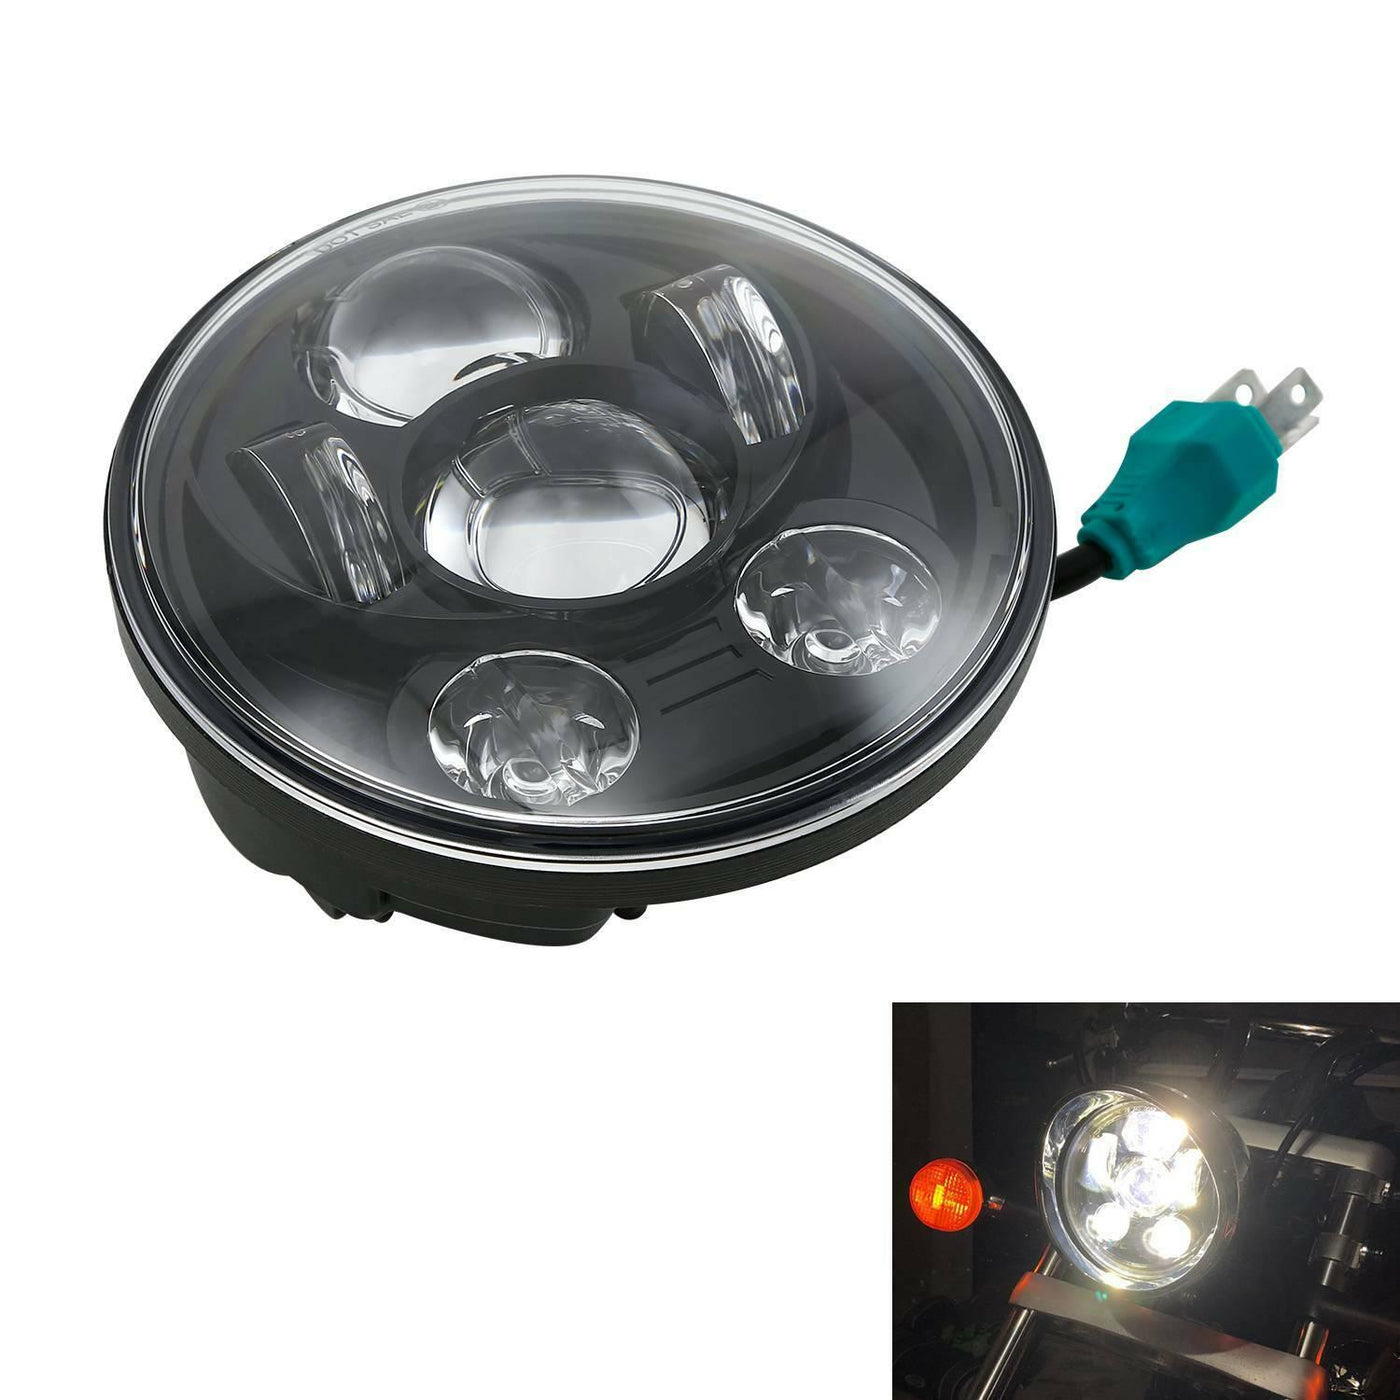 5-3/4" 5.75" Projector LED Headlight Fit For Harley Sportster XL 883 1200 Black - Moto Life Products